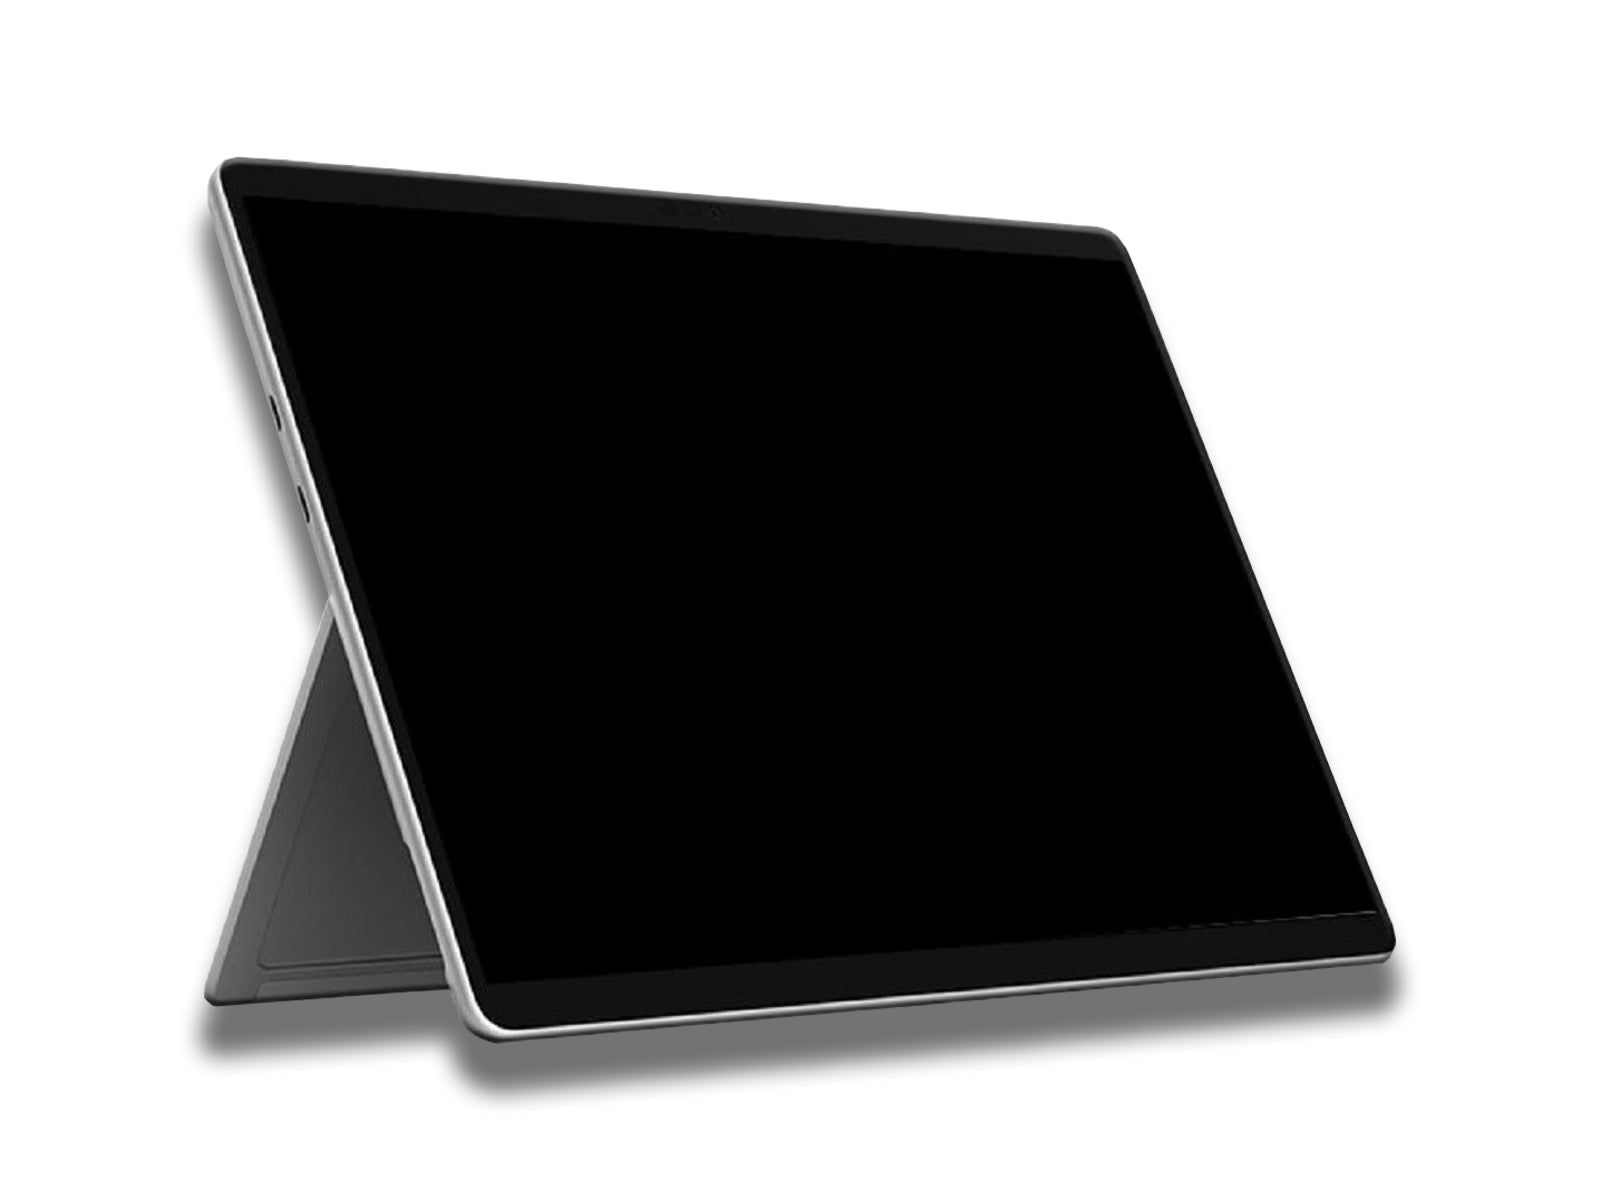 Image shows a full frontal view of the home platinum Microsoft Surface Pro 9